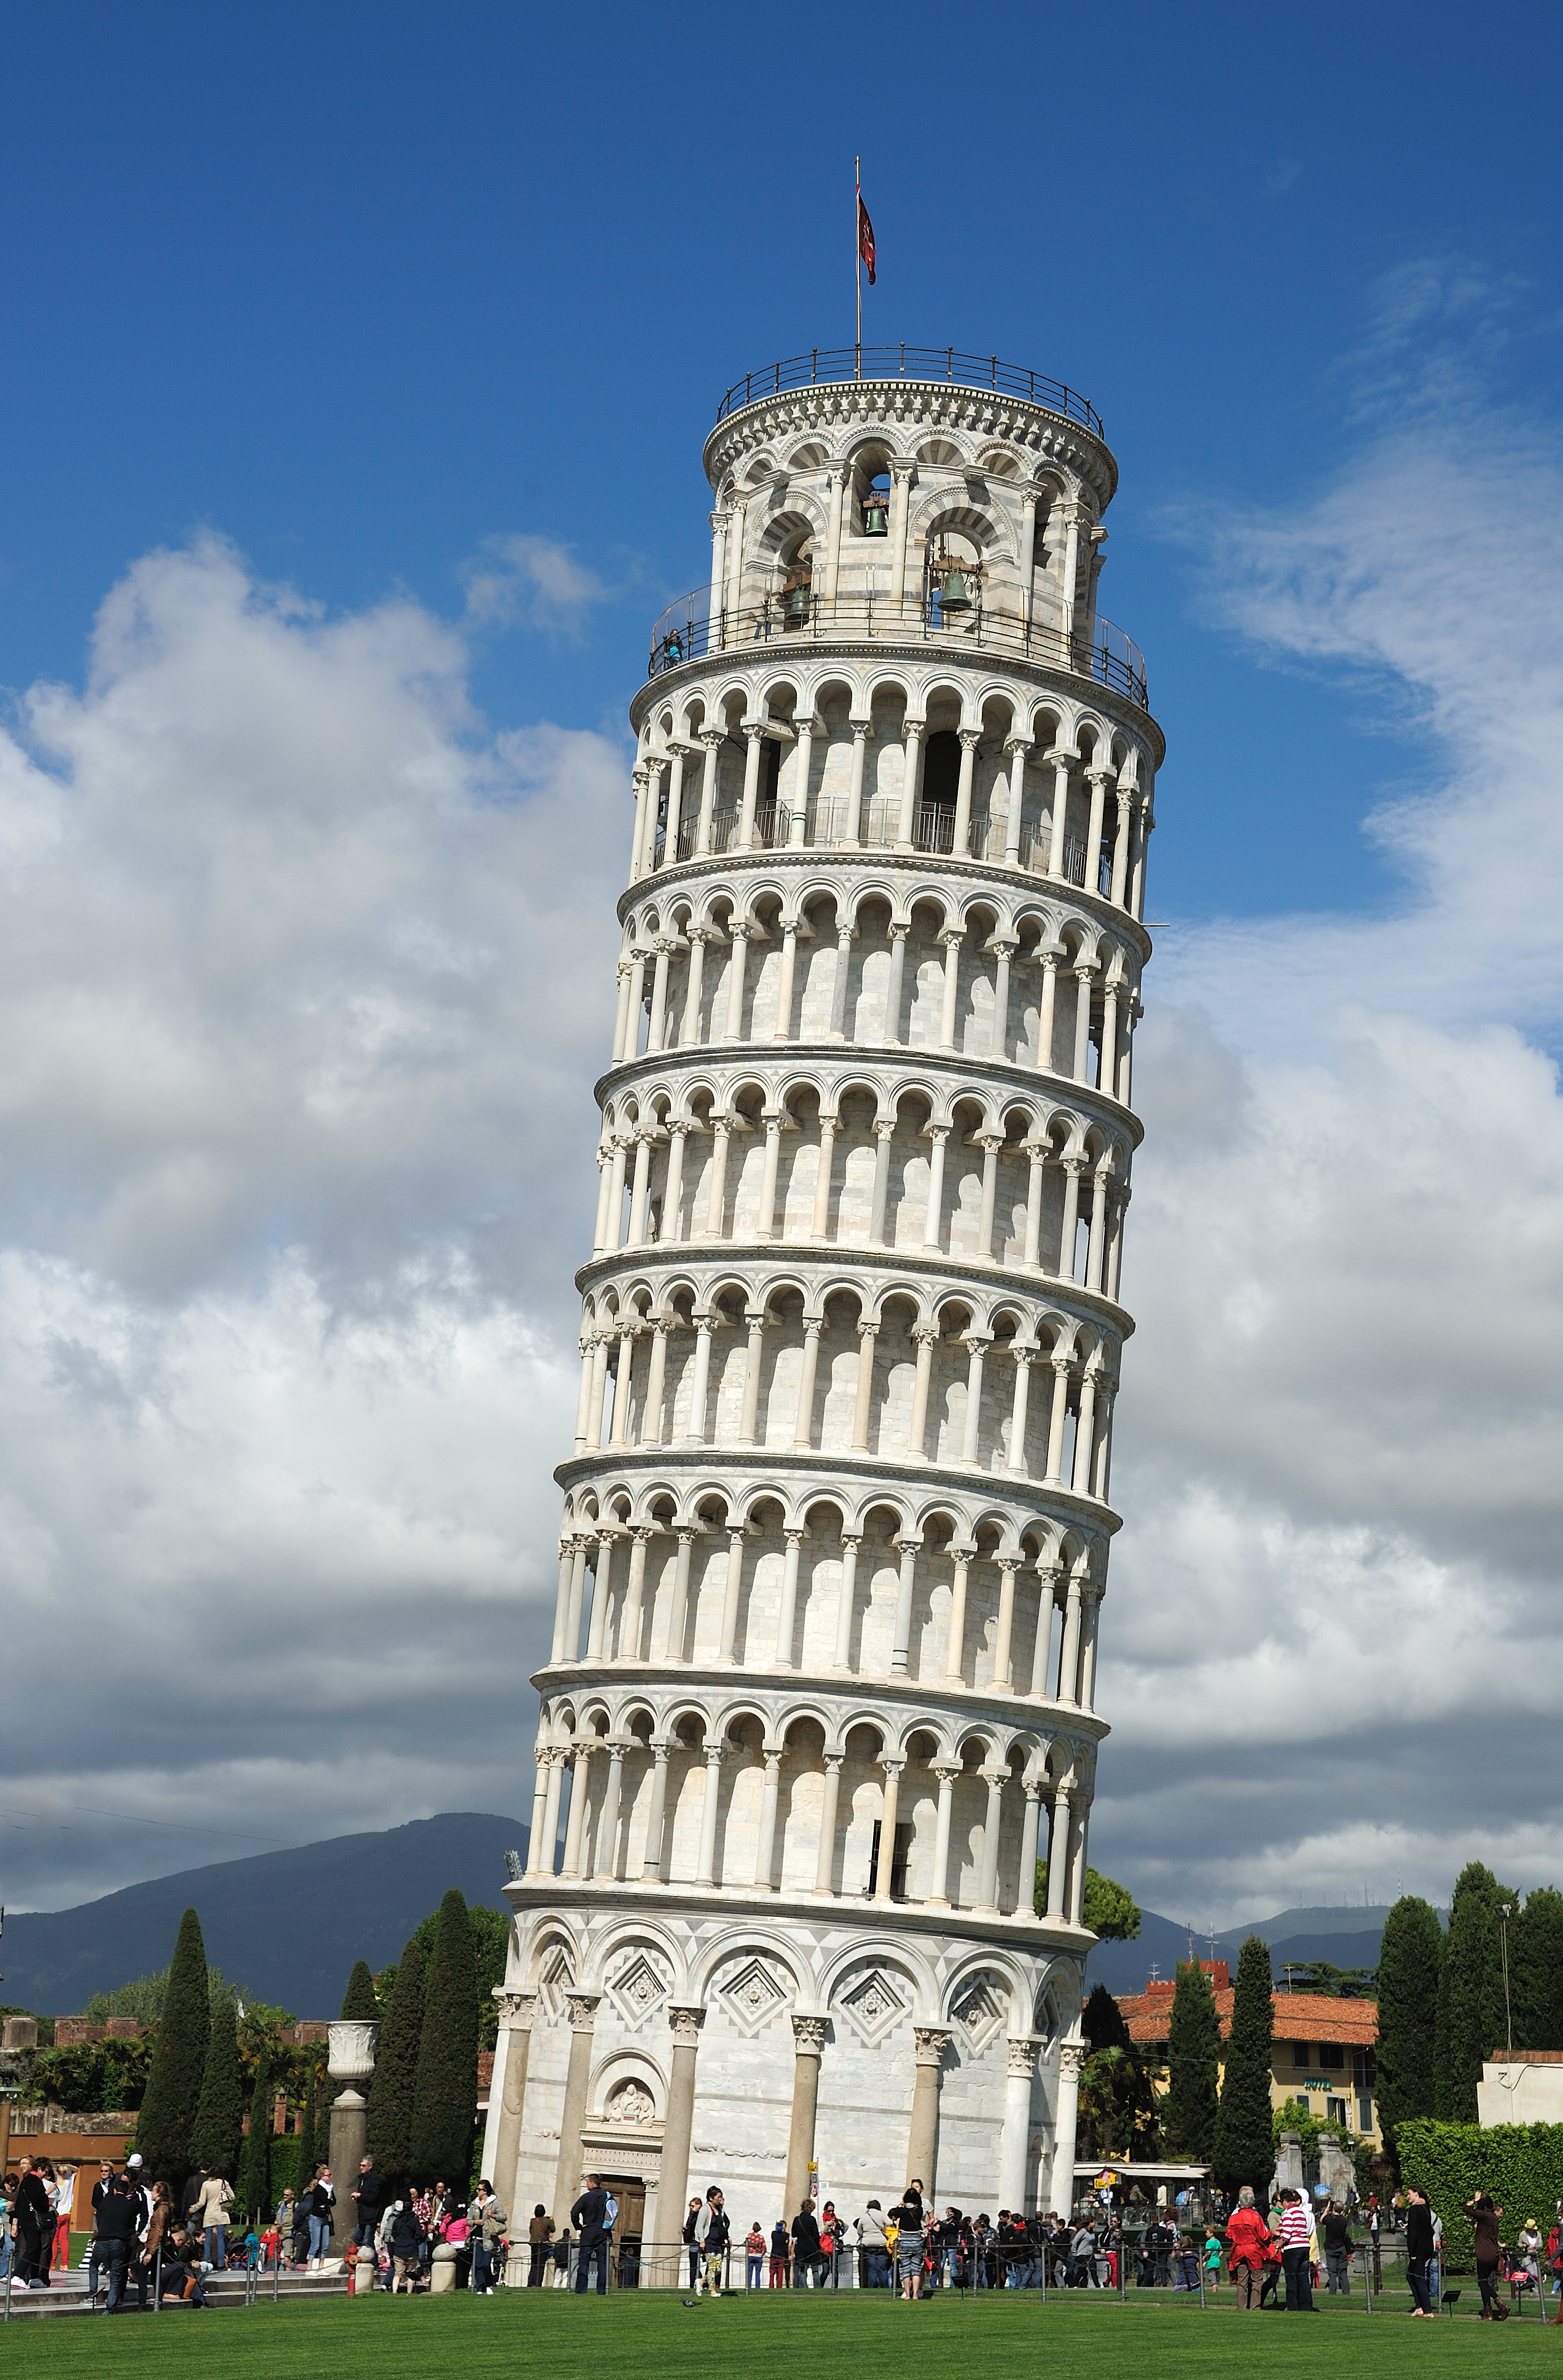 tower of pizza italy